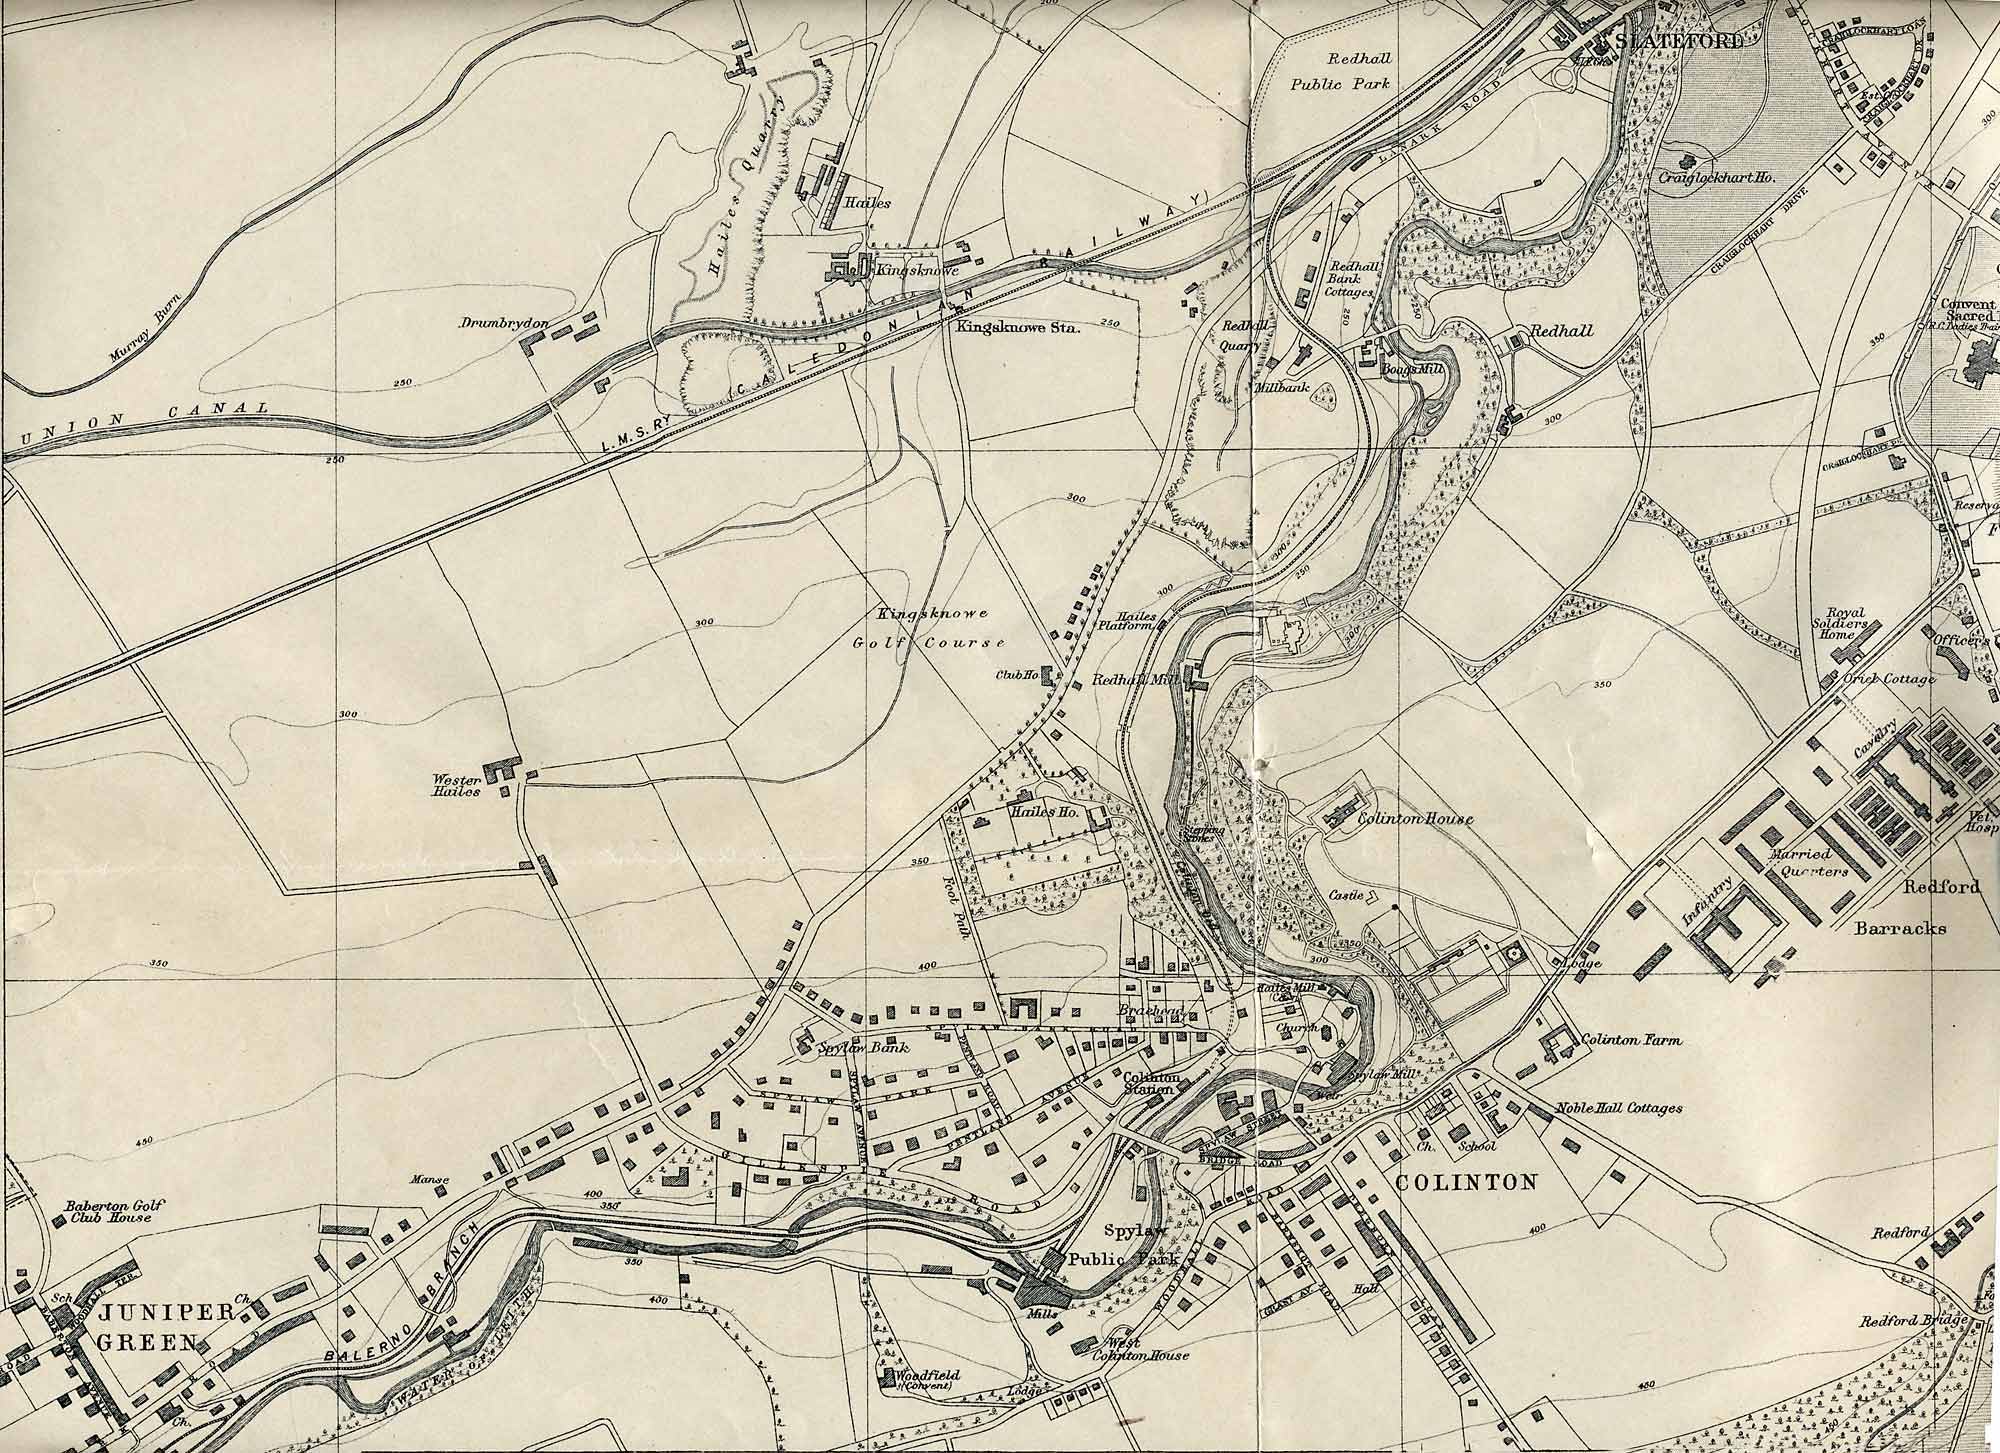 Edinburgh and Leith map, 1925  -  Juniper Green and Slateford section  -  Enlarged